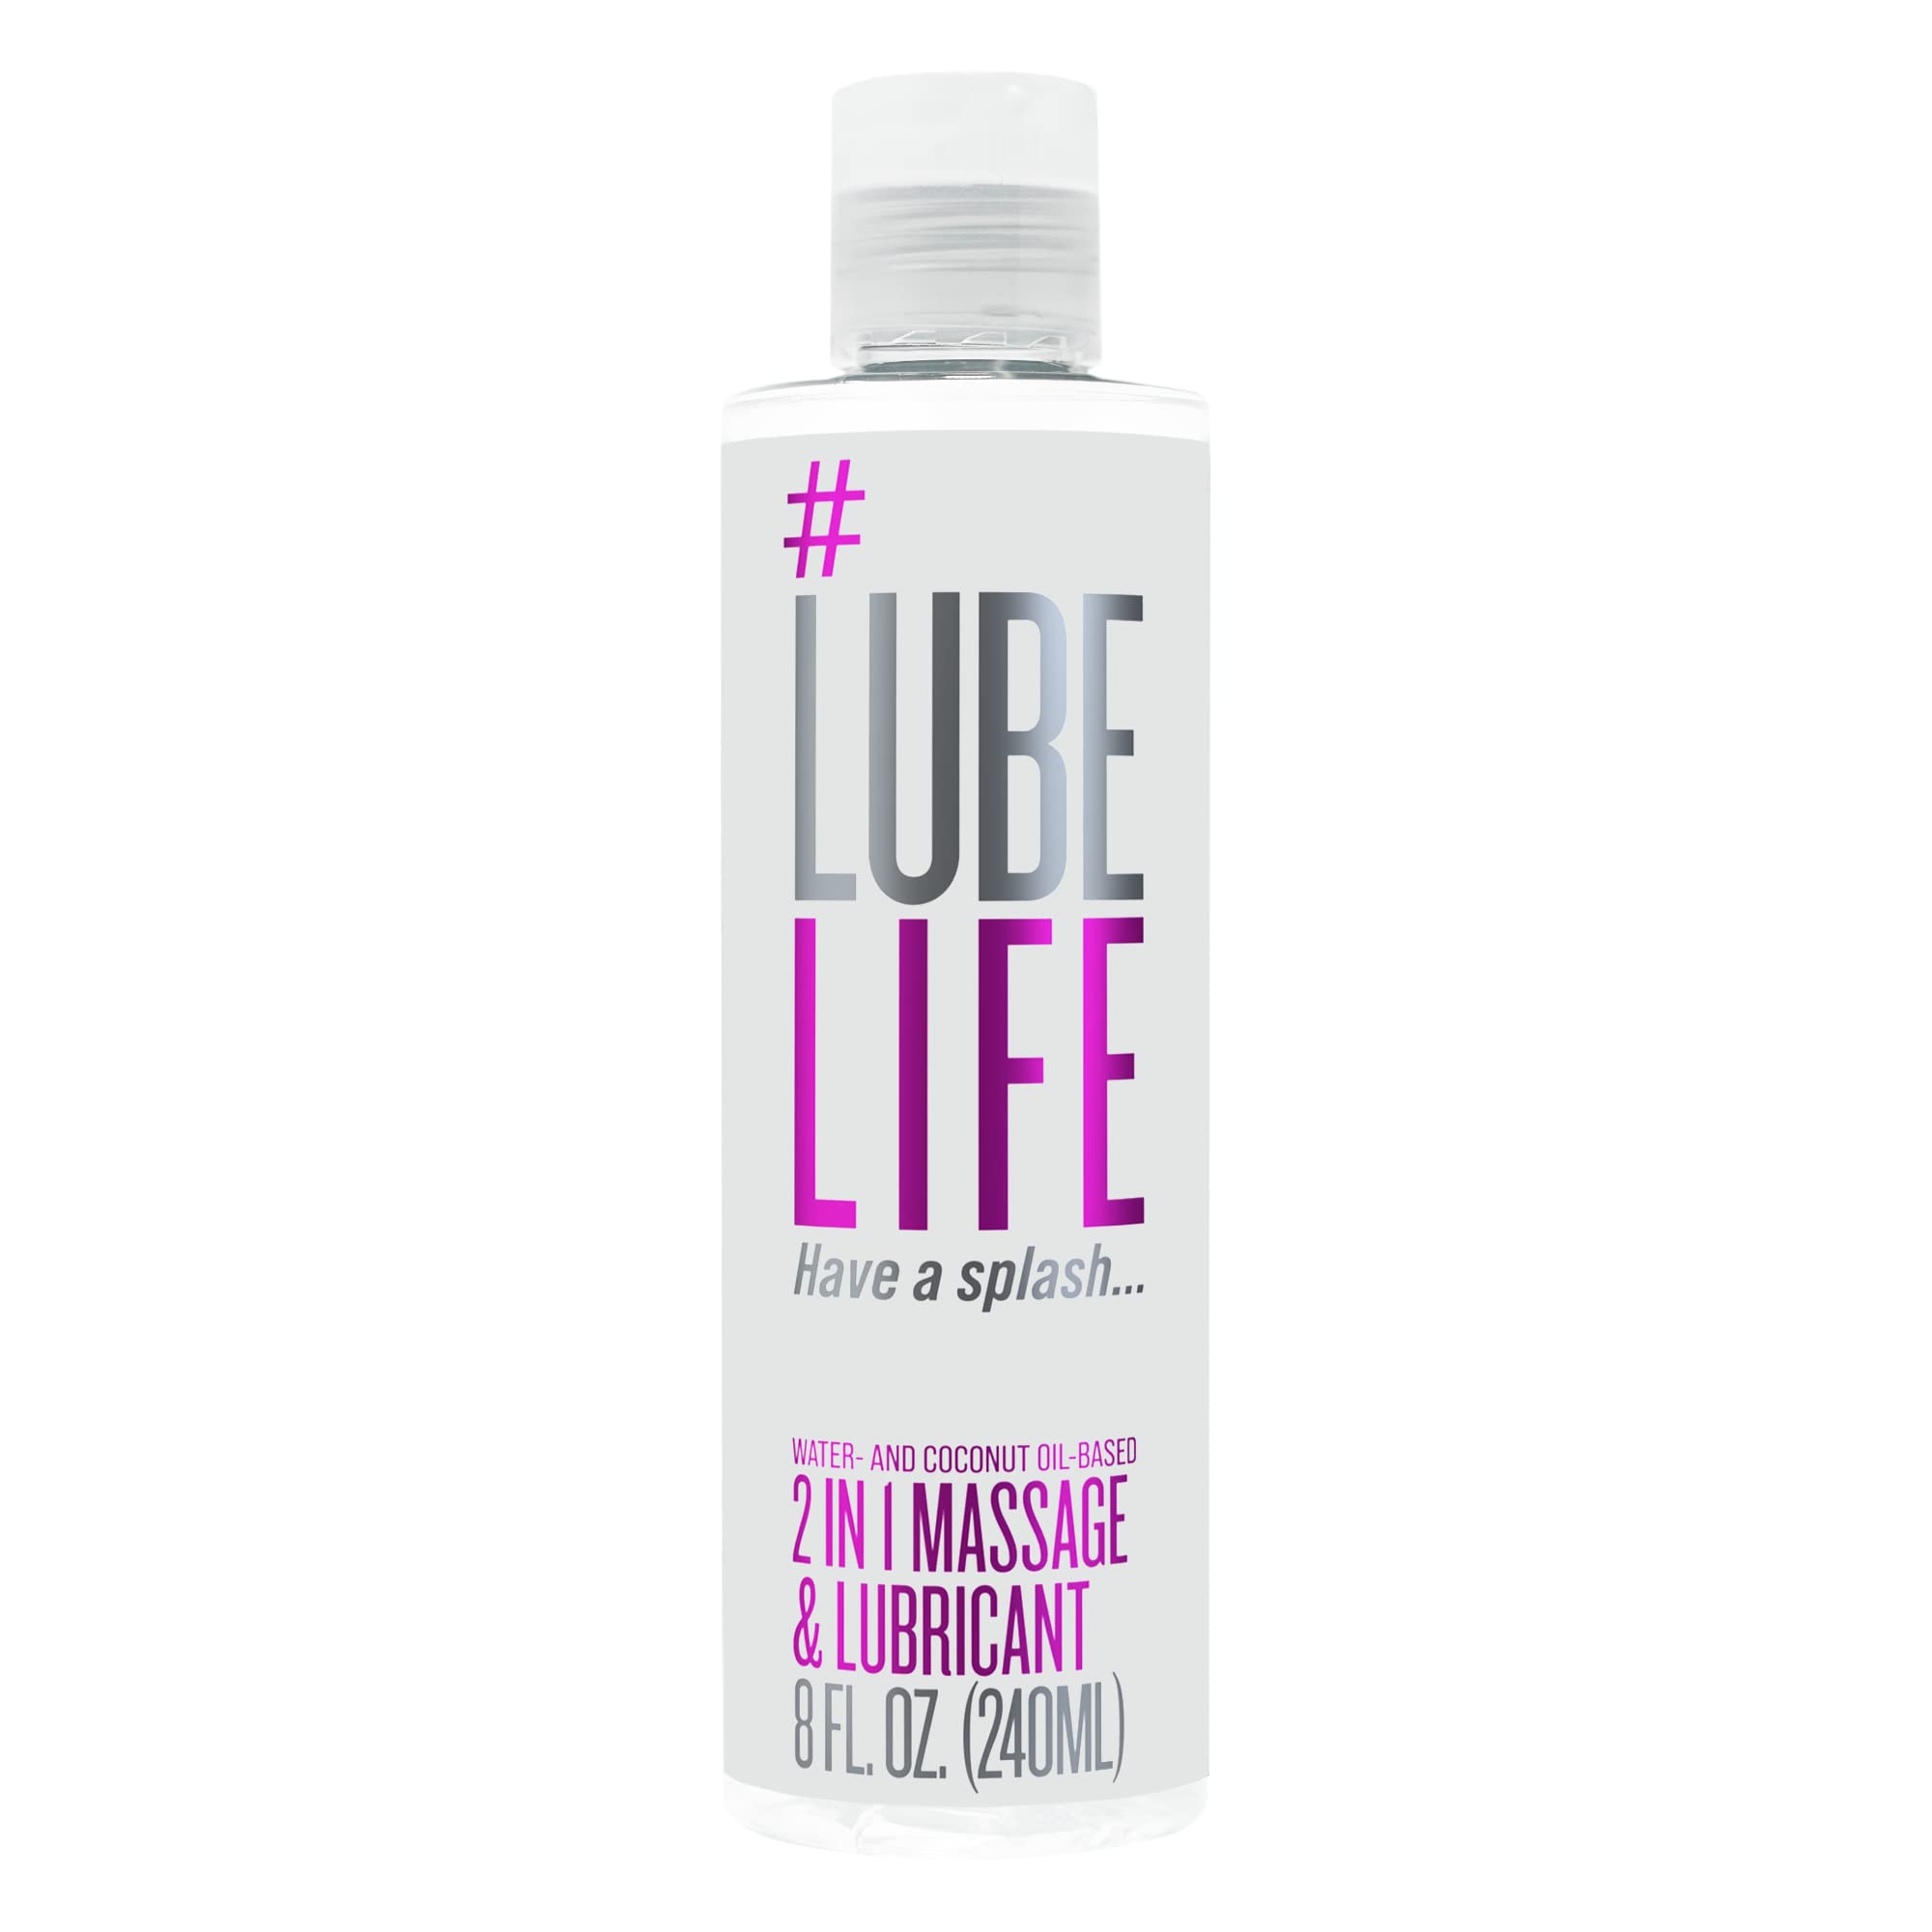 Lube Life 2-in-1 Massage and Lubricant aka coconut oil lube anal also a vegan lube